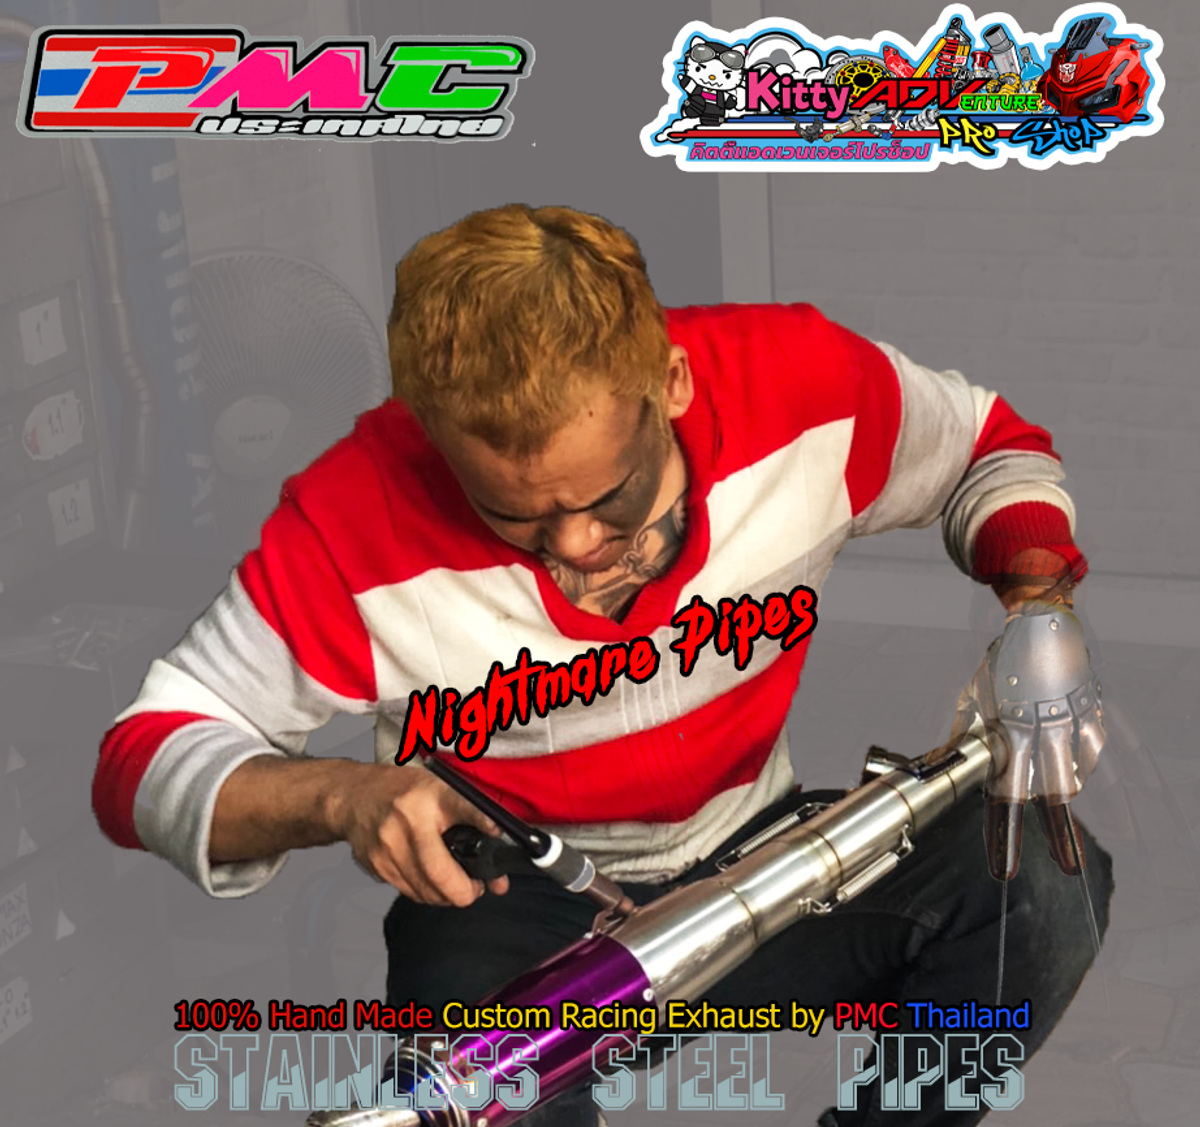 Official Distributor for PMC Racing Exhaust